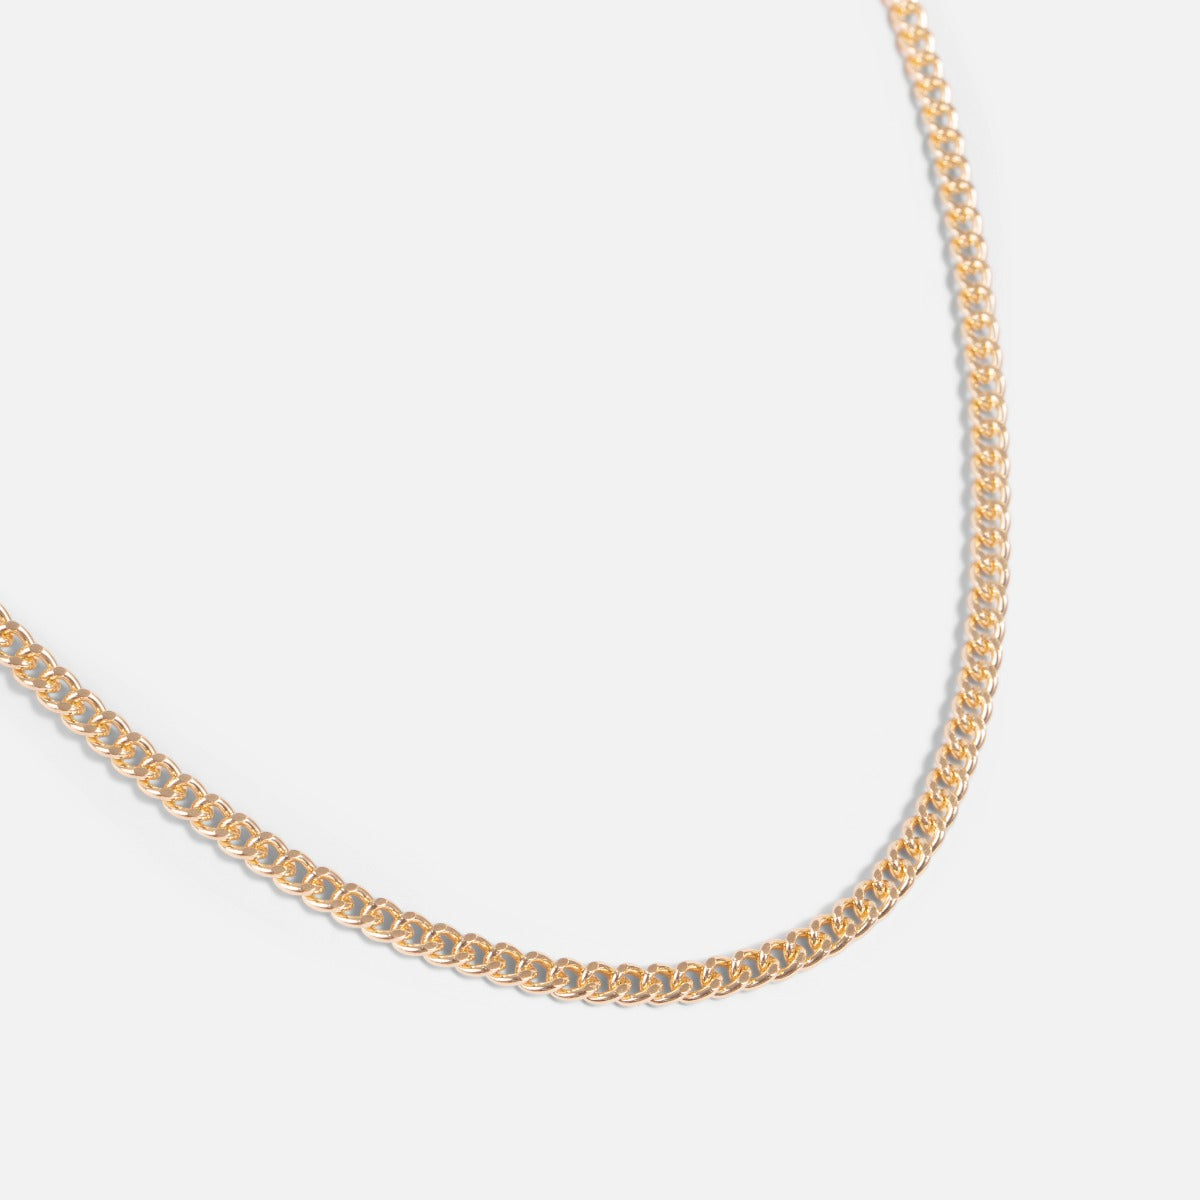 Golden mesh necklace with hammered circle clasp and pearl charm